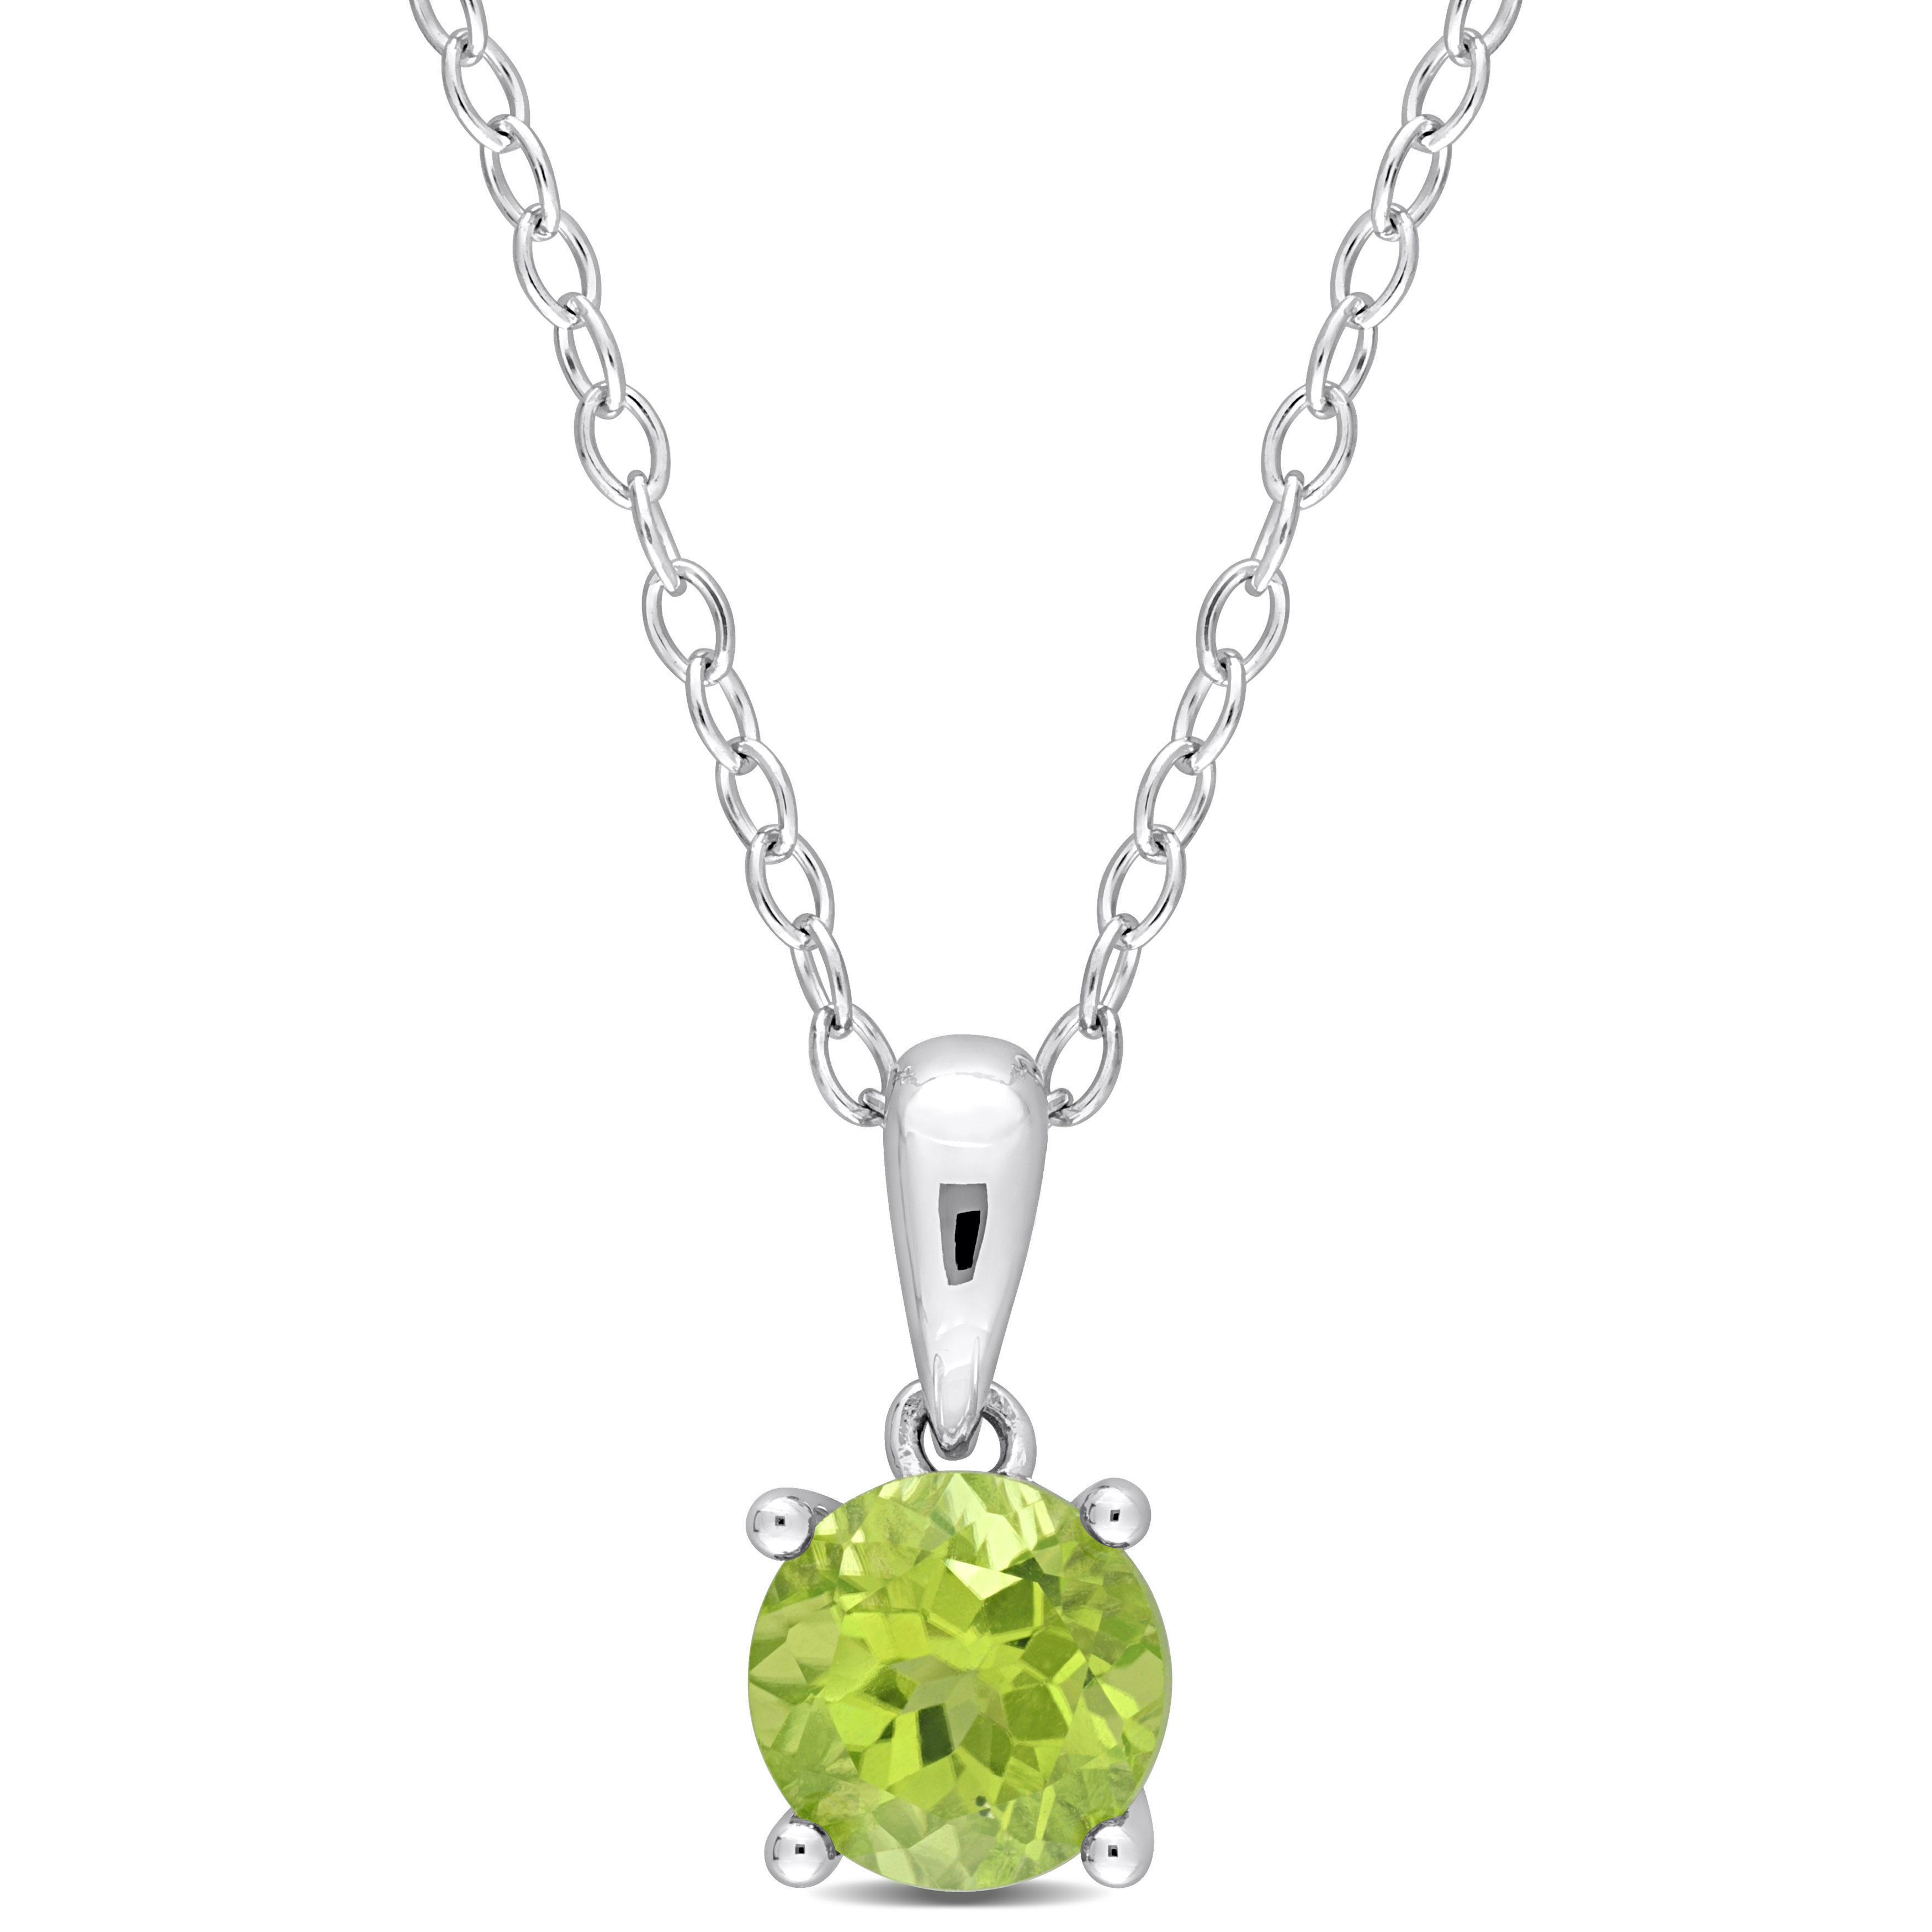 7/8 CT TGW Peridot Solitaire Heart Design Pendant with Chain in Sterling Silver - 18 in.